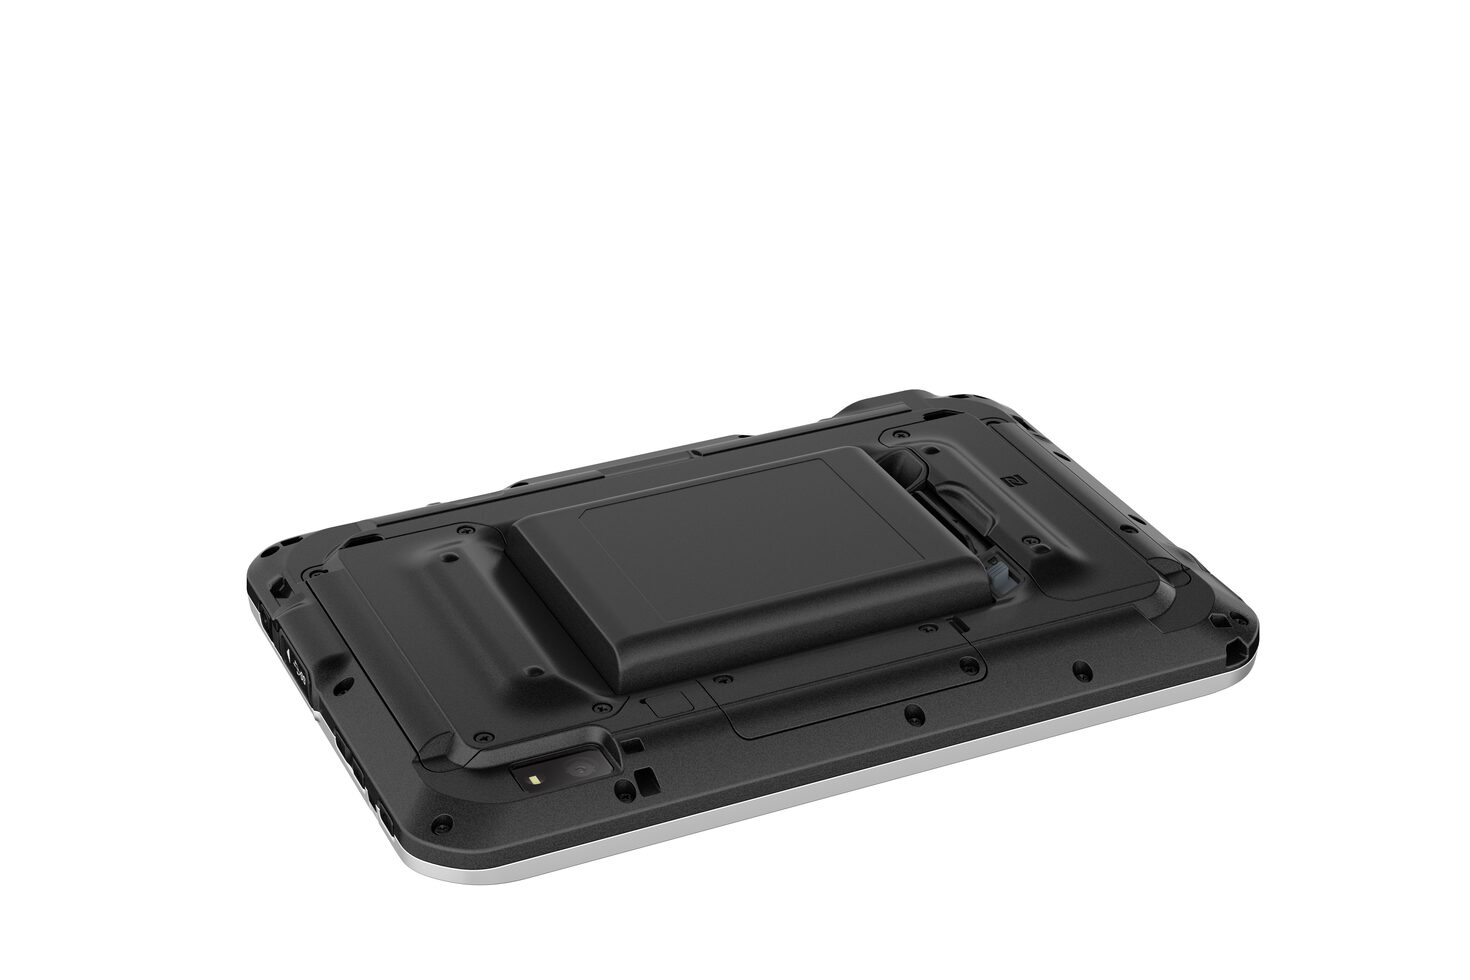 TOUGHBOOK S1 Product Image